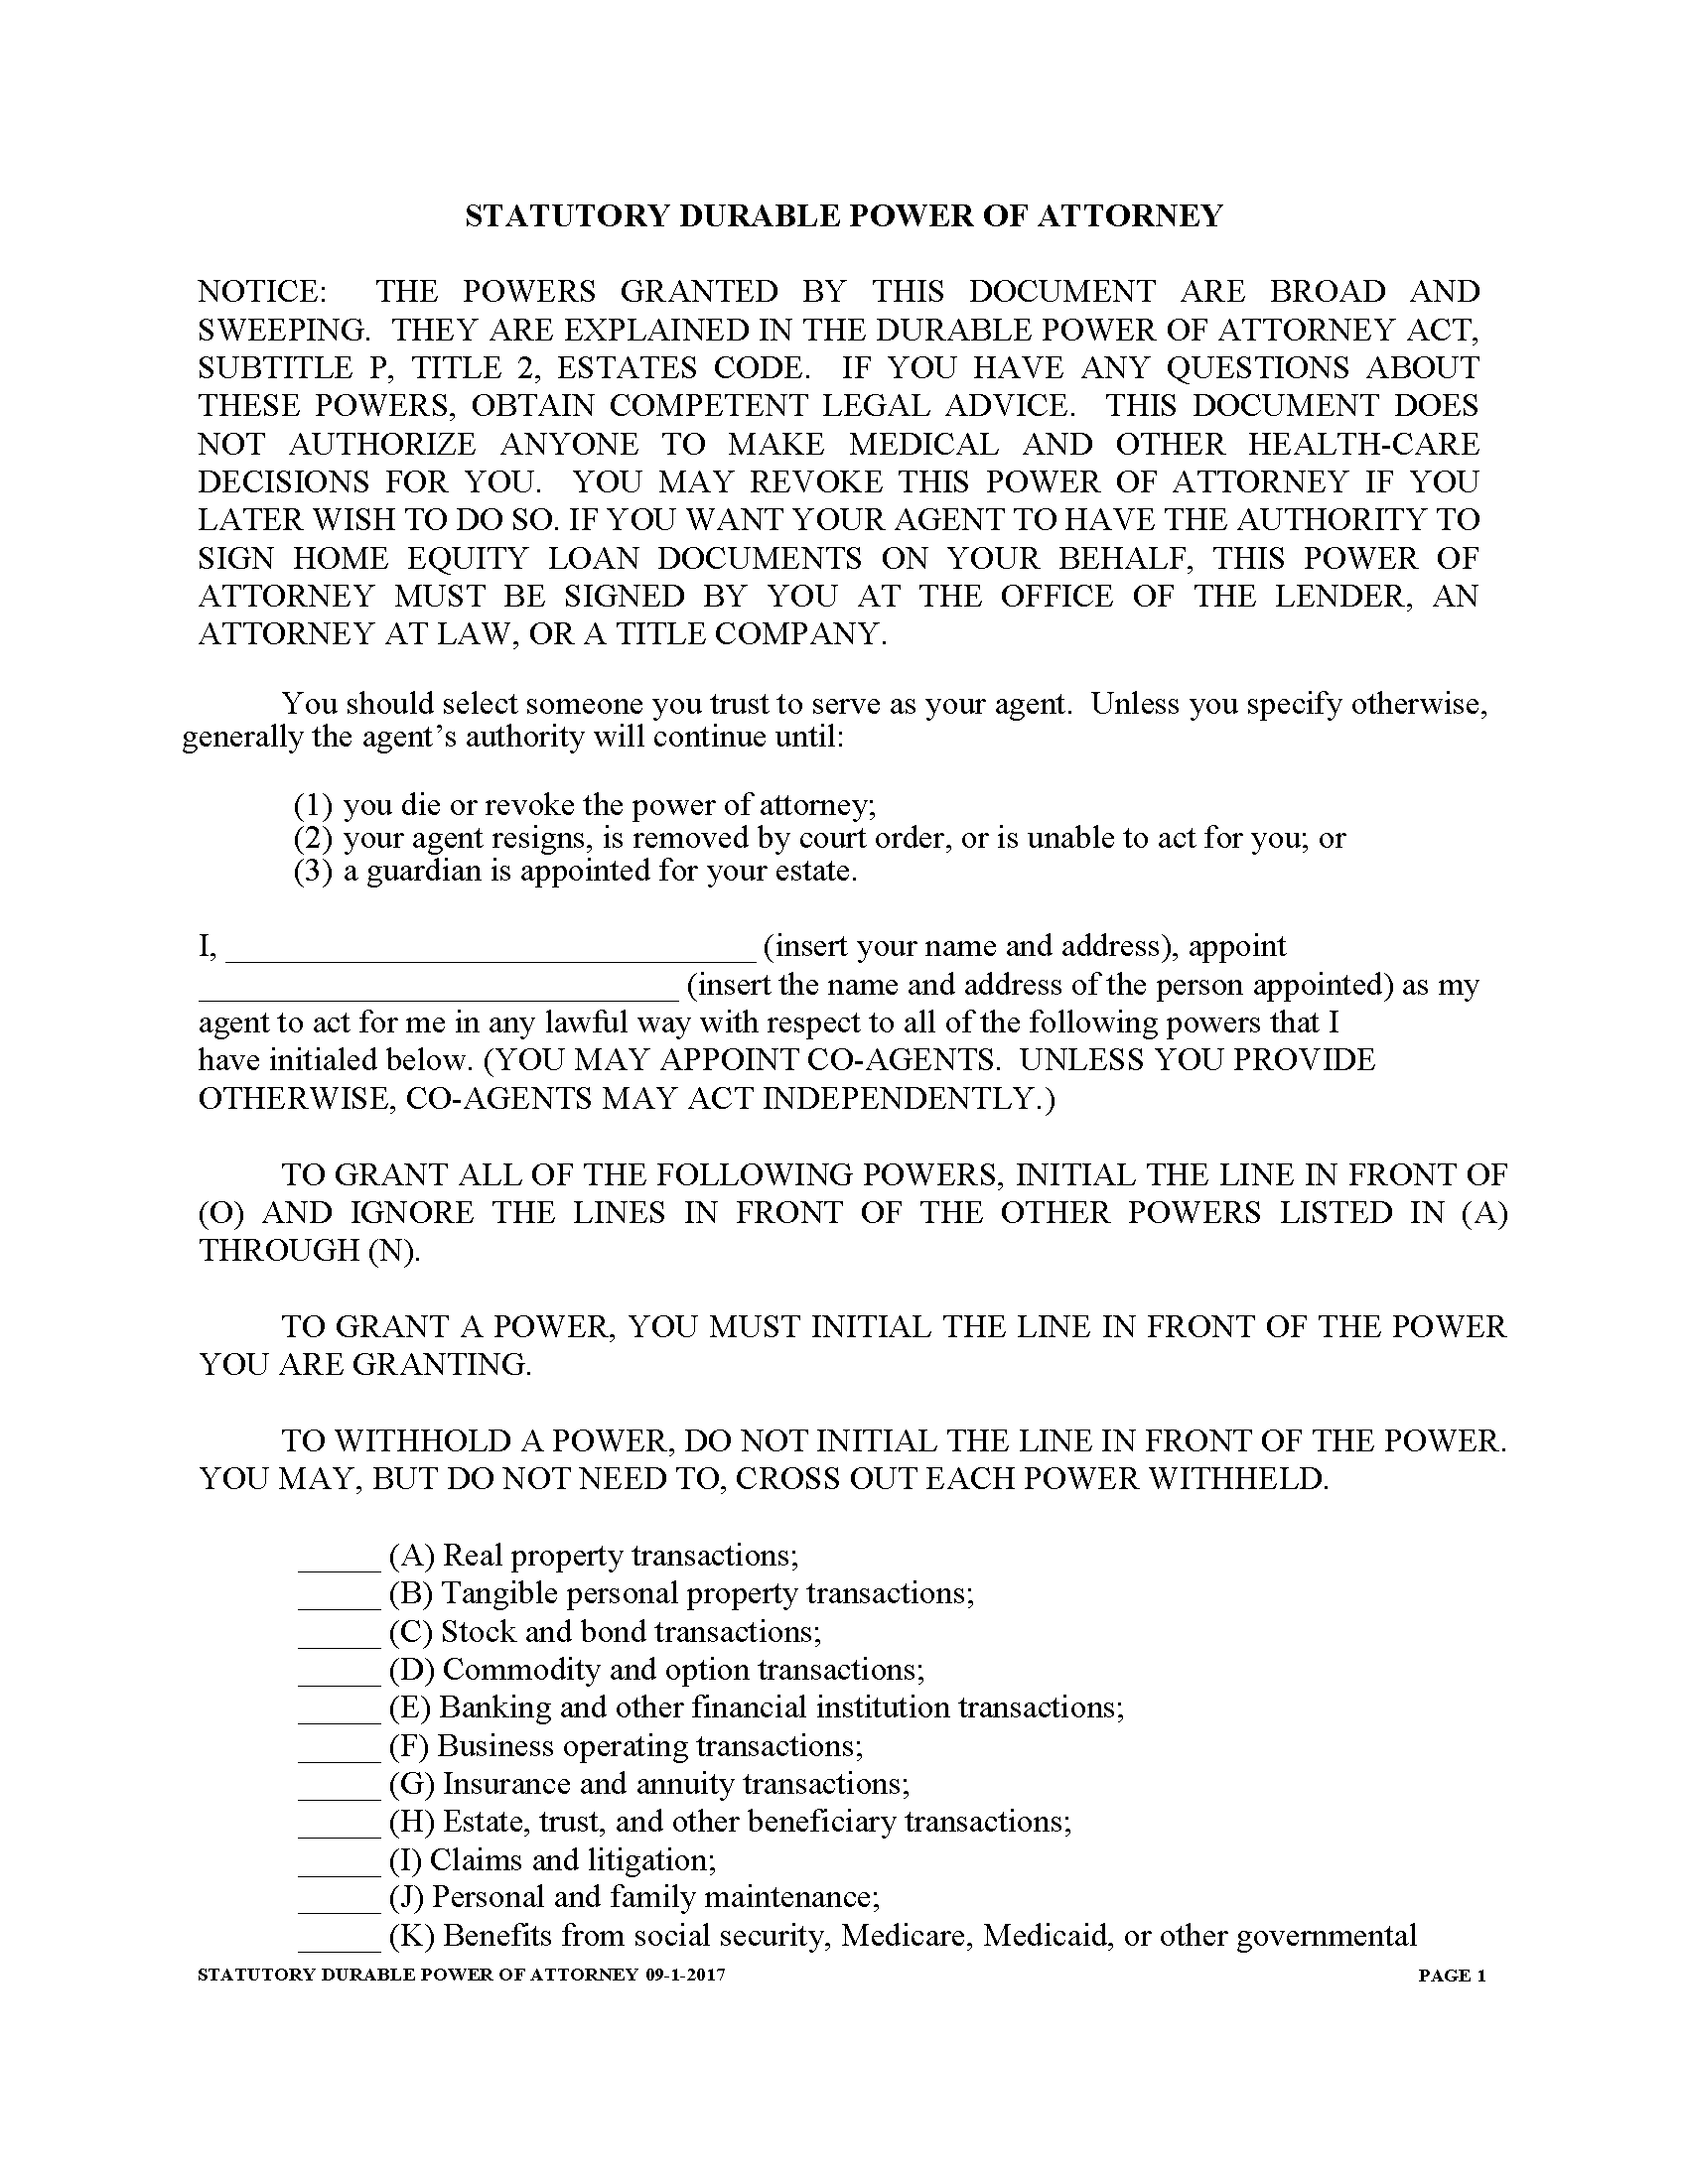 texas-durable-power-of-attorney-form-fillable-pdf-free-printable-legal-forms